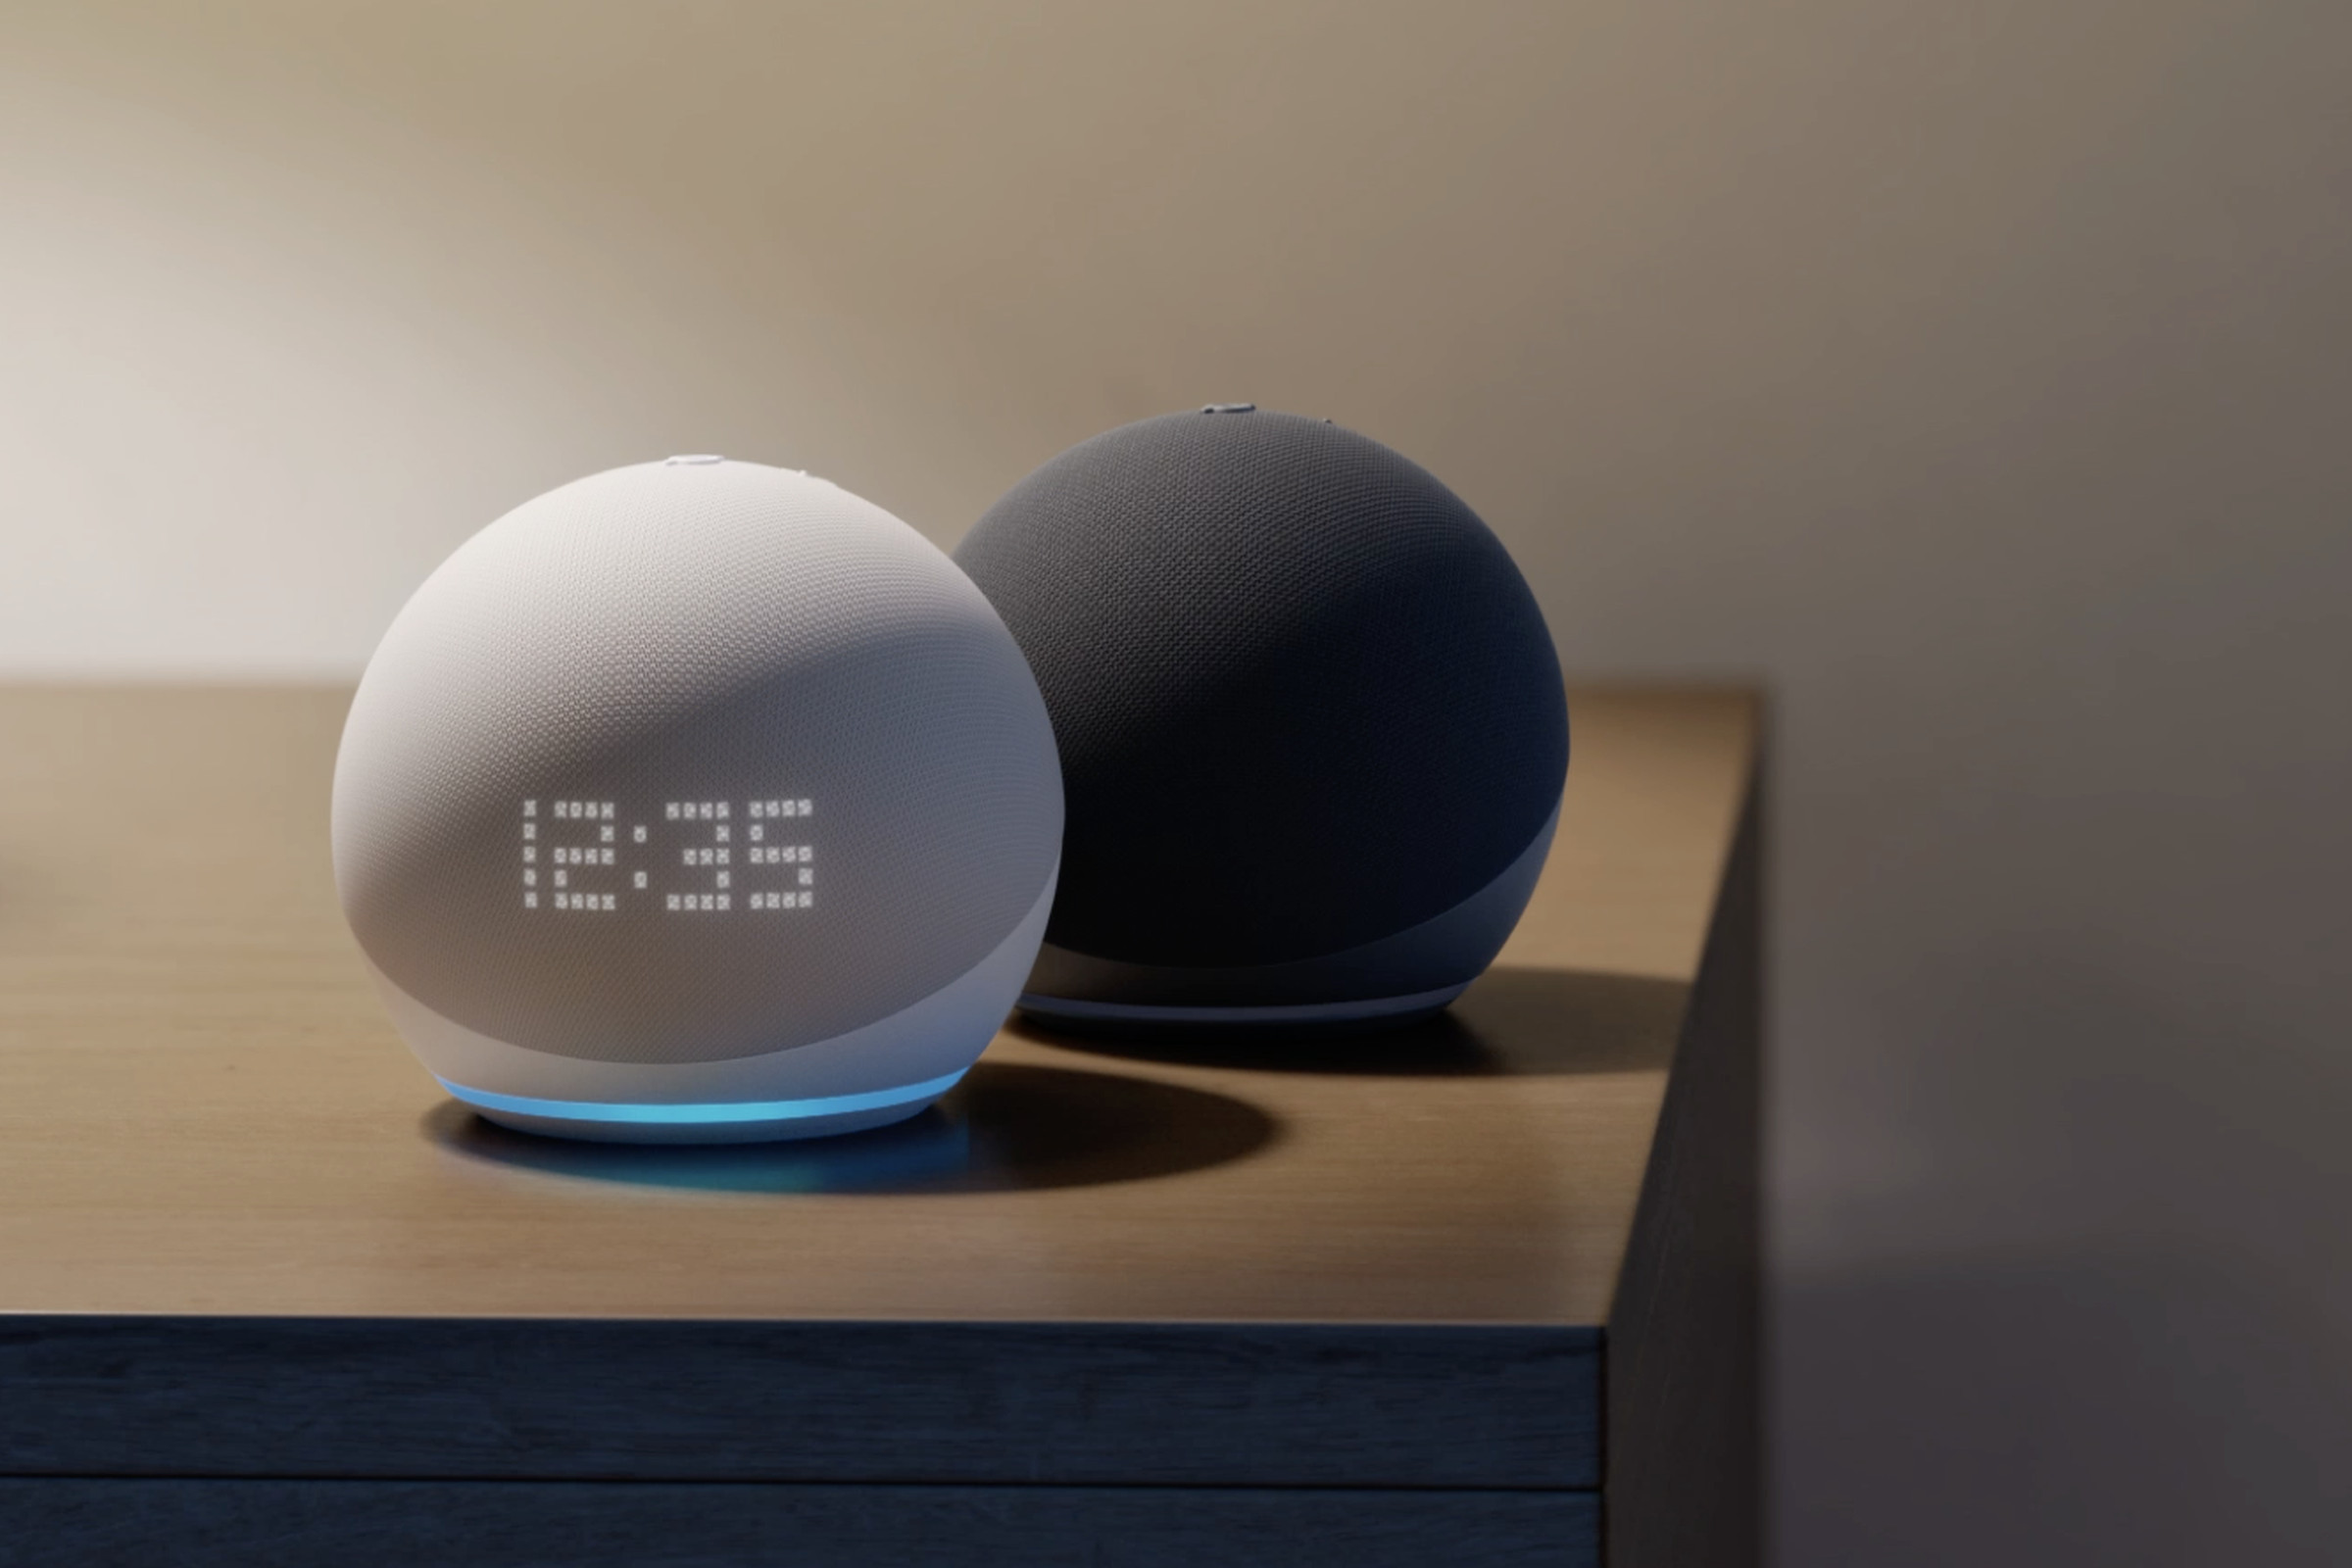 Two smart speakers on a table